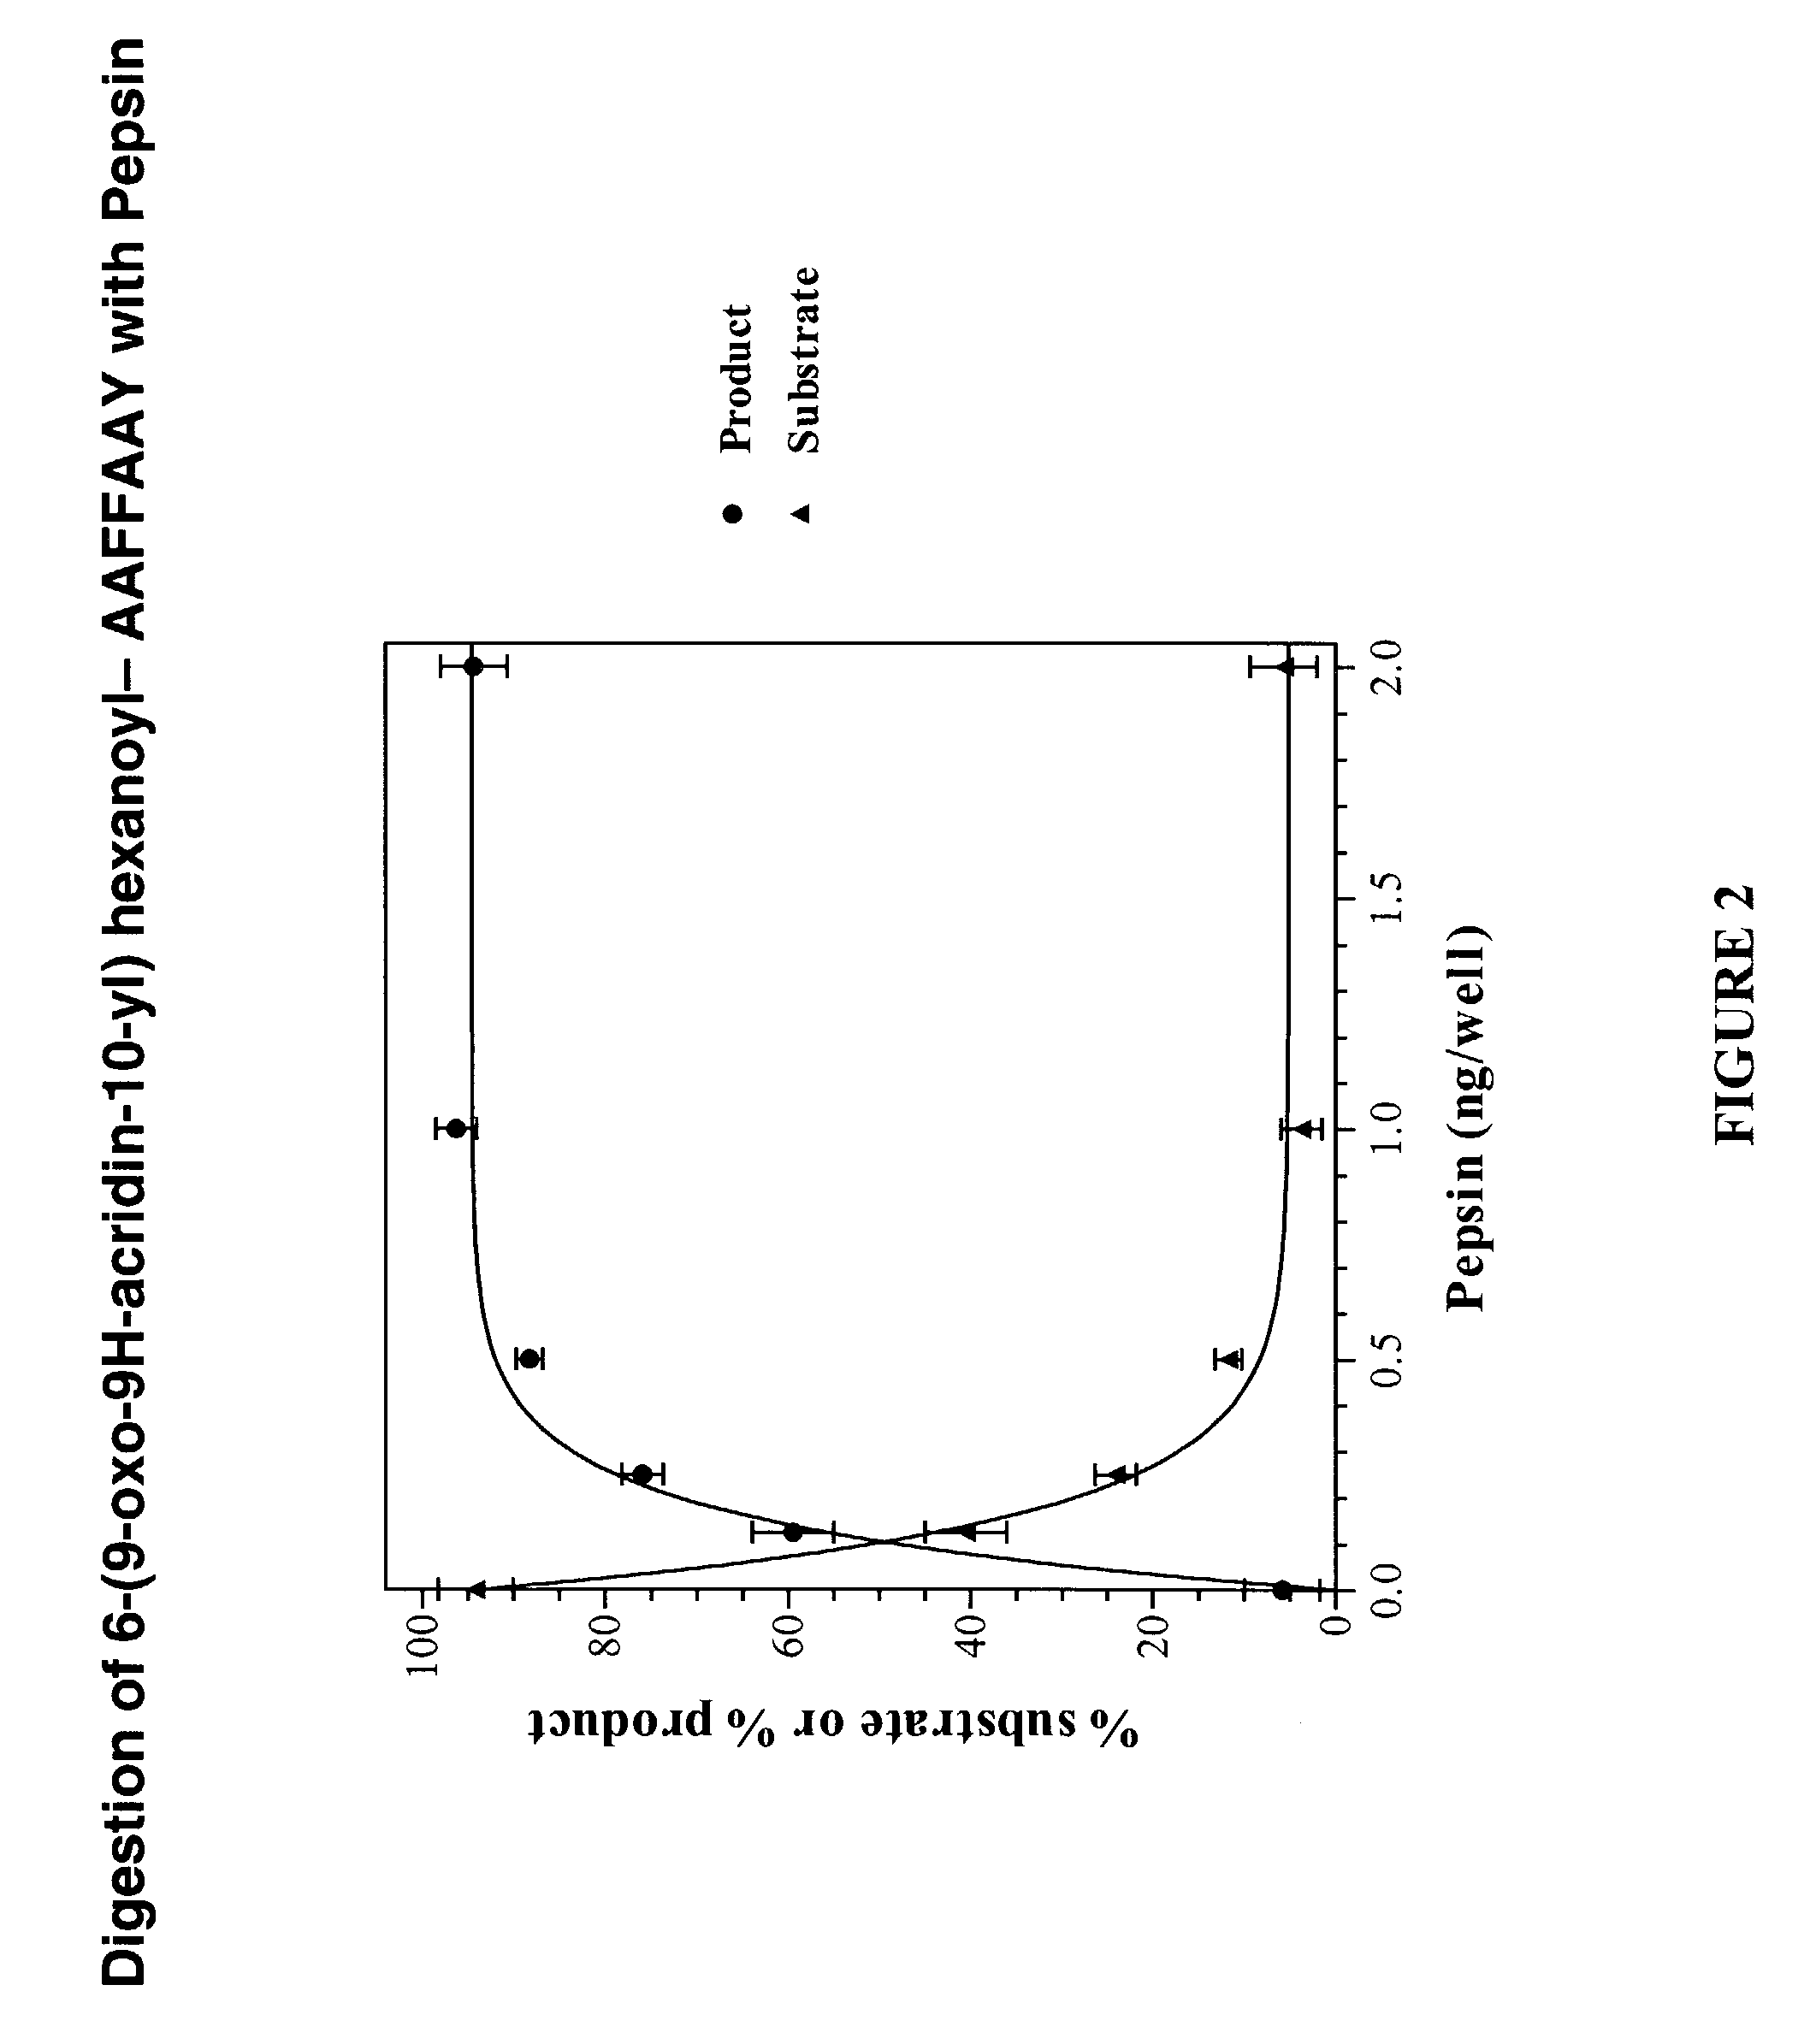 Methods for measuring enzyme activity